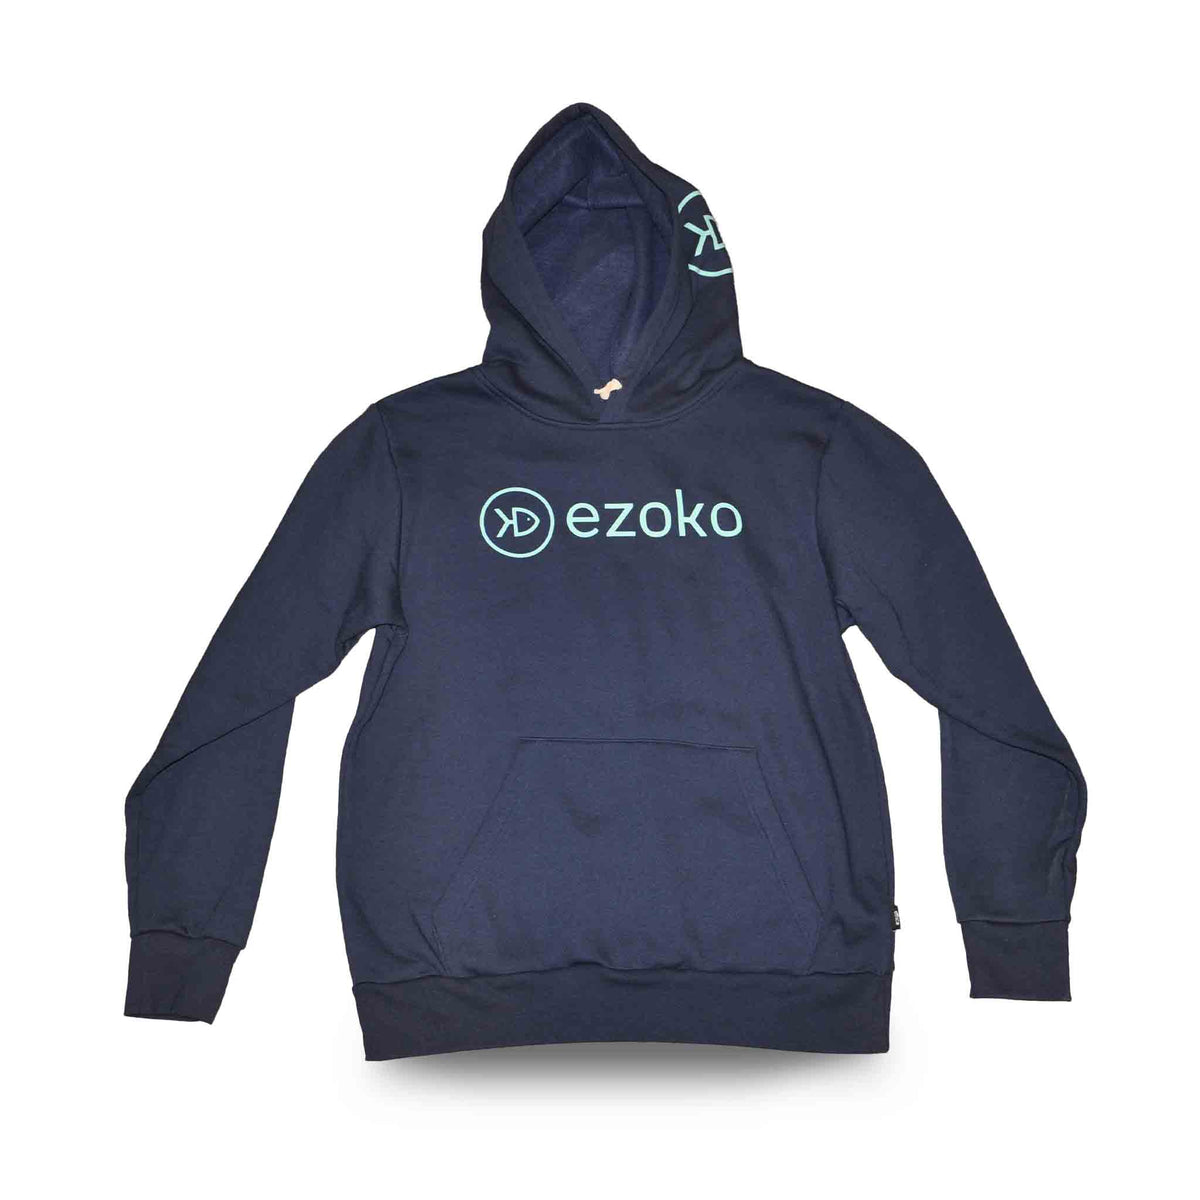 Front view of navy blue ezoko hoodie with green ezoko logo on the chest